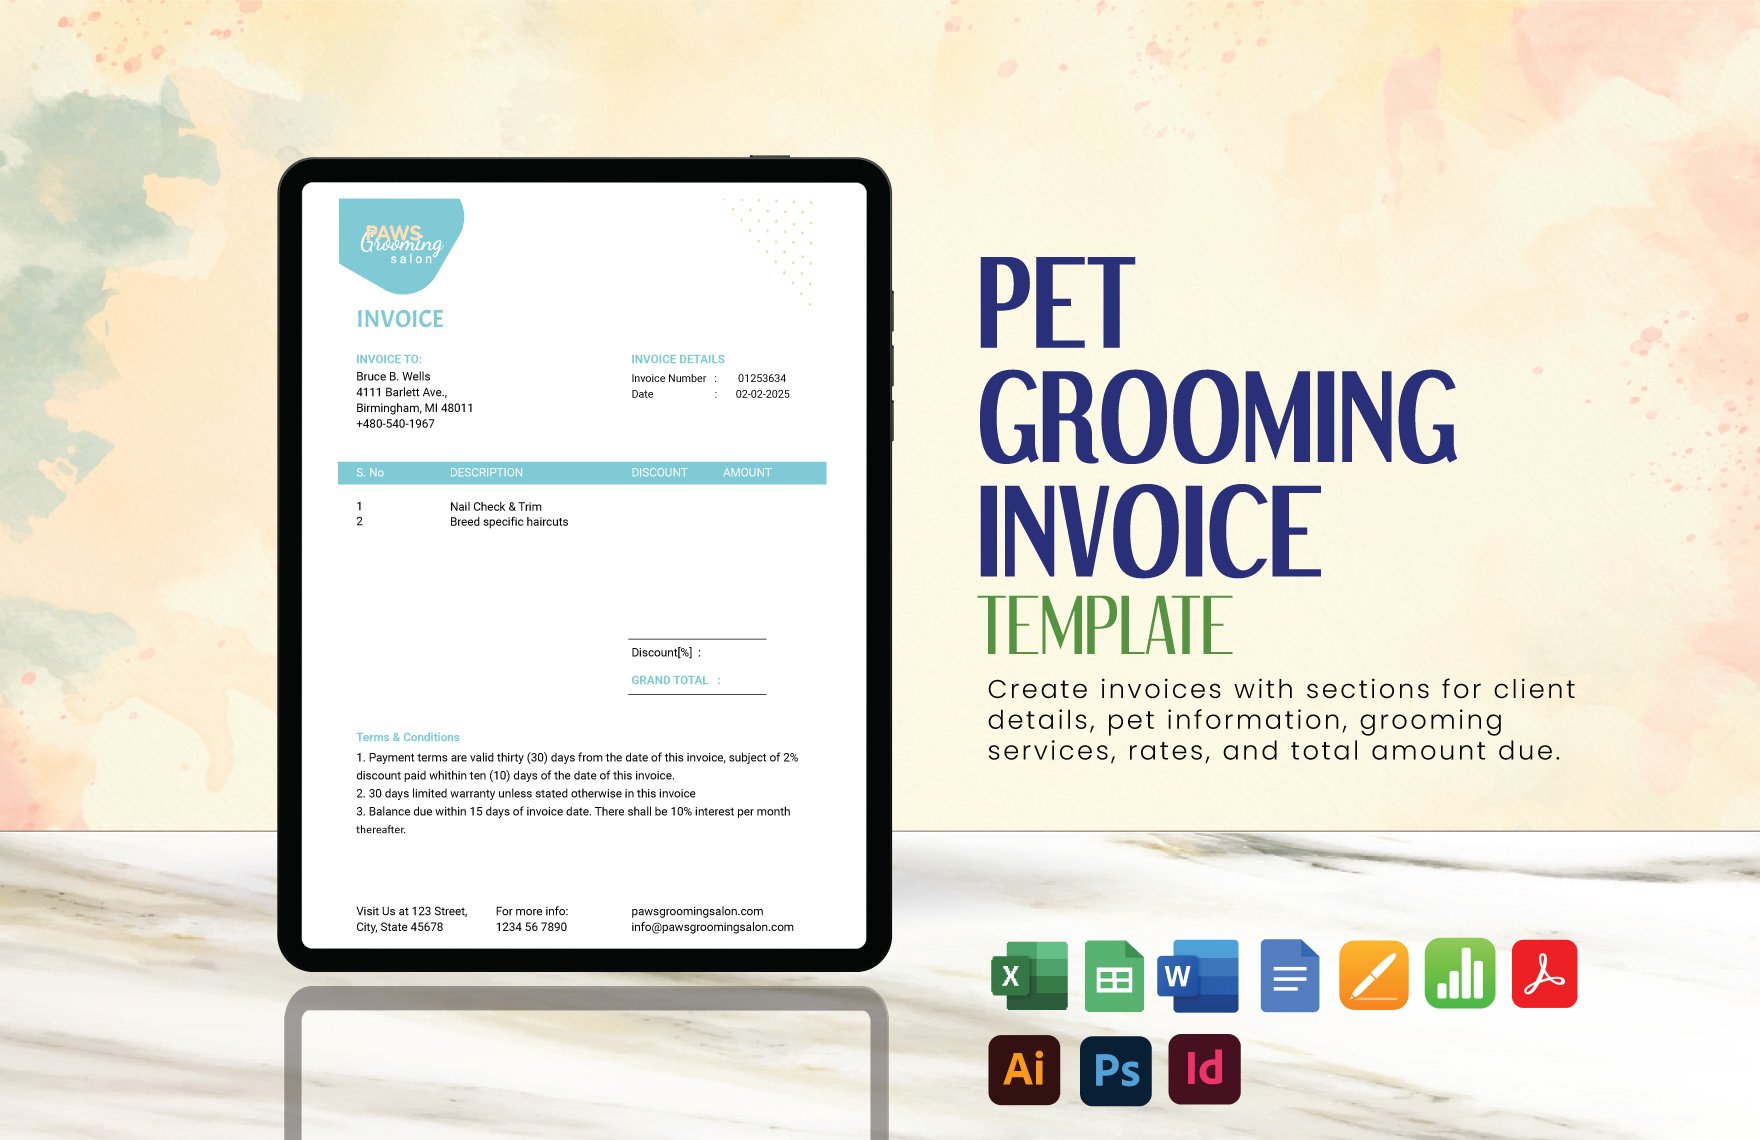 Pet Grooming Invoice Template in Word, Google Docs, Excel, PDF, Google Sheets, Illustrator, PSD, Apple Pages, InDesign, Apple Numbers